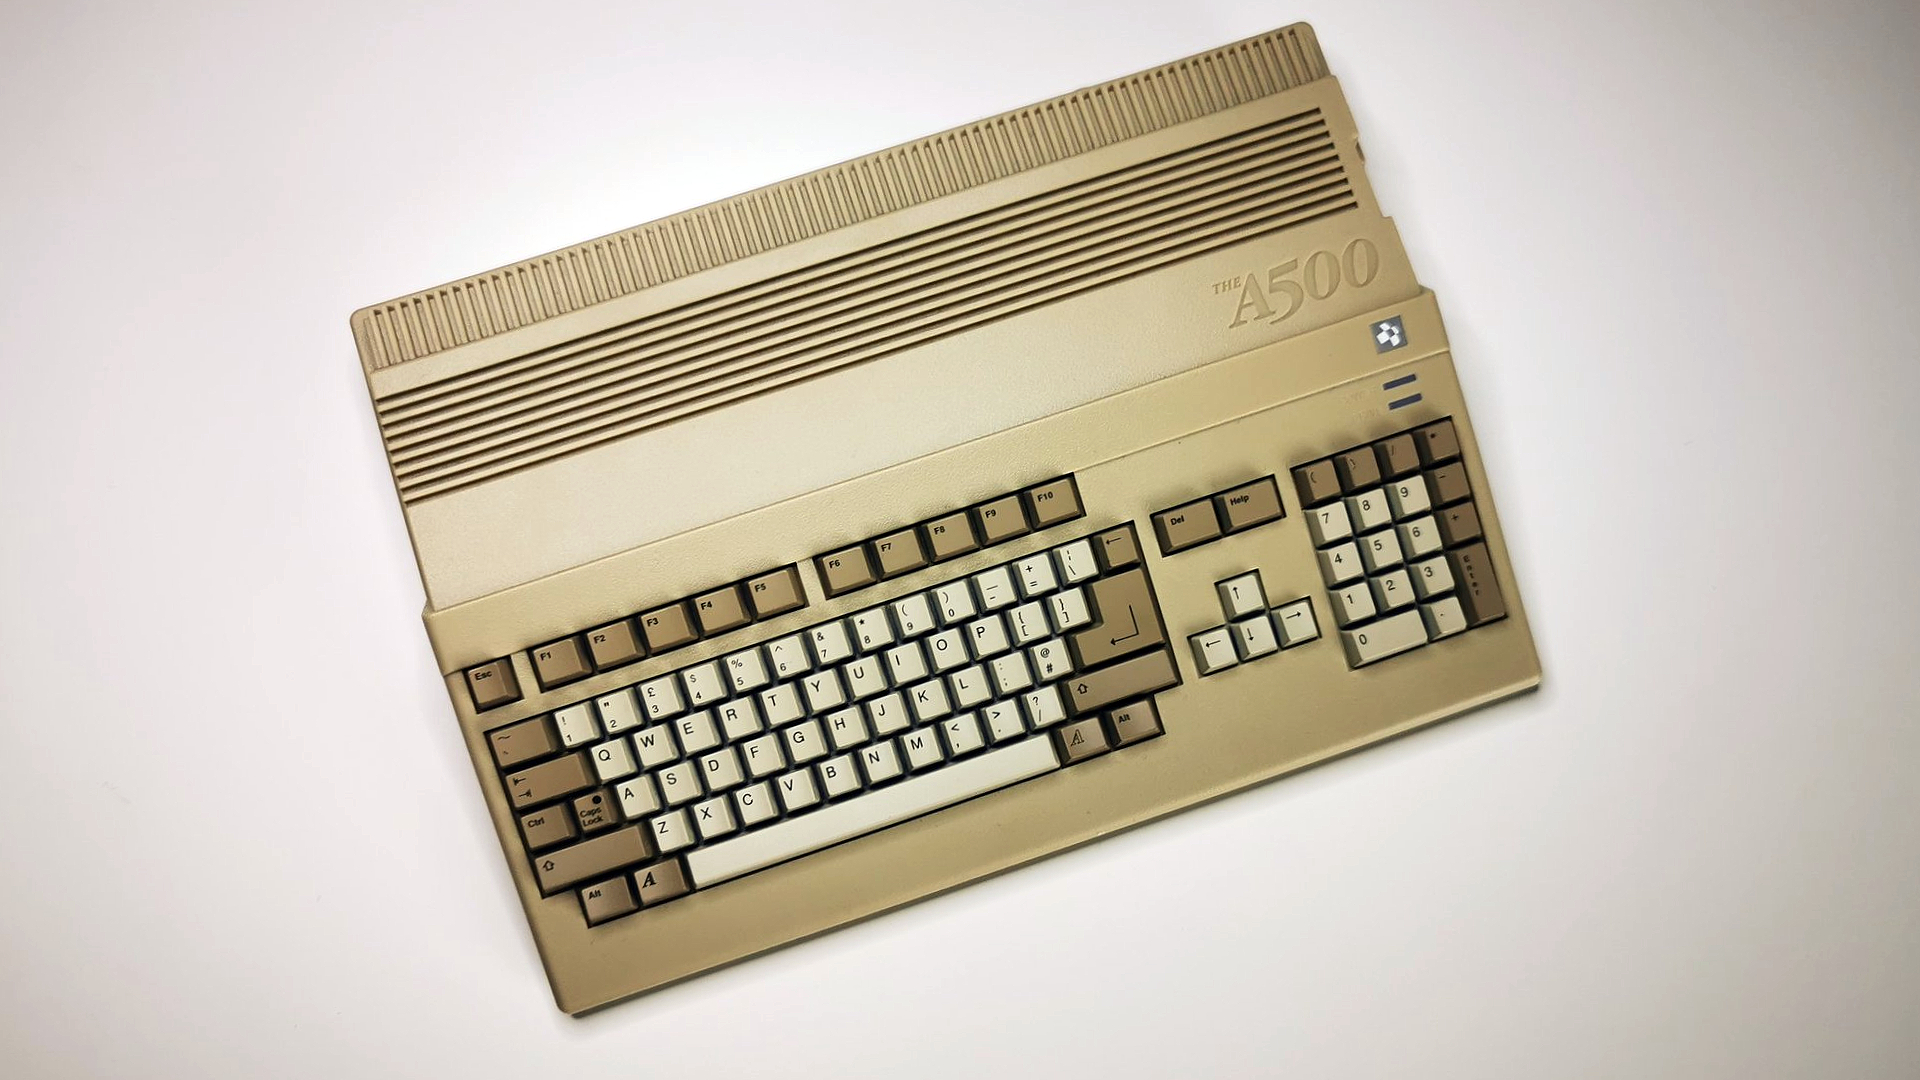 A500 Mini, a retro Amiga 500, launches early 2022 with 25 games